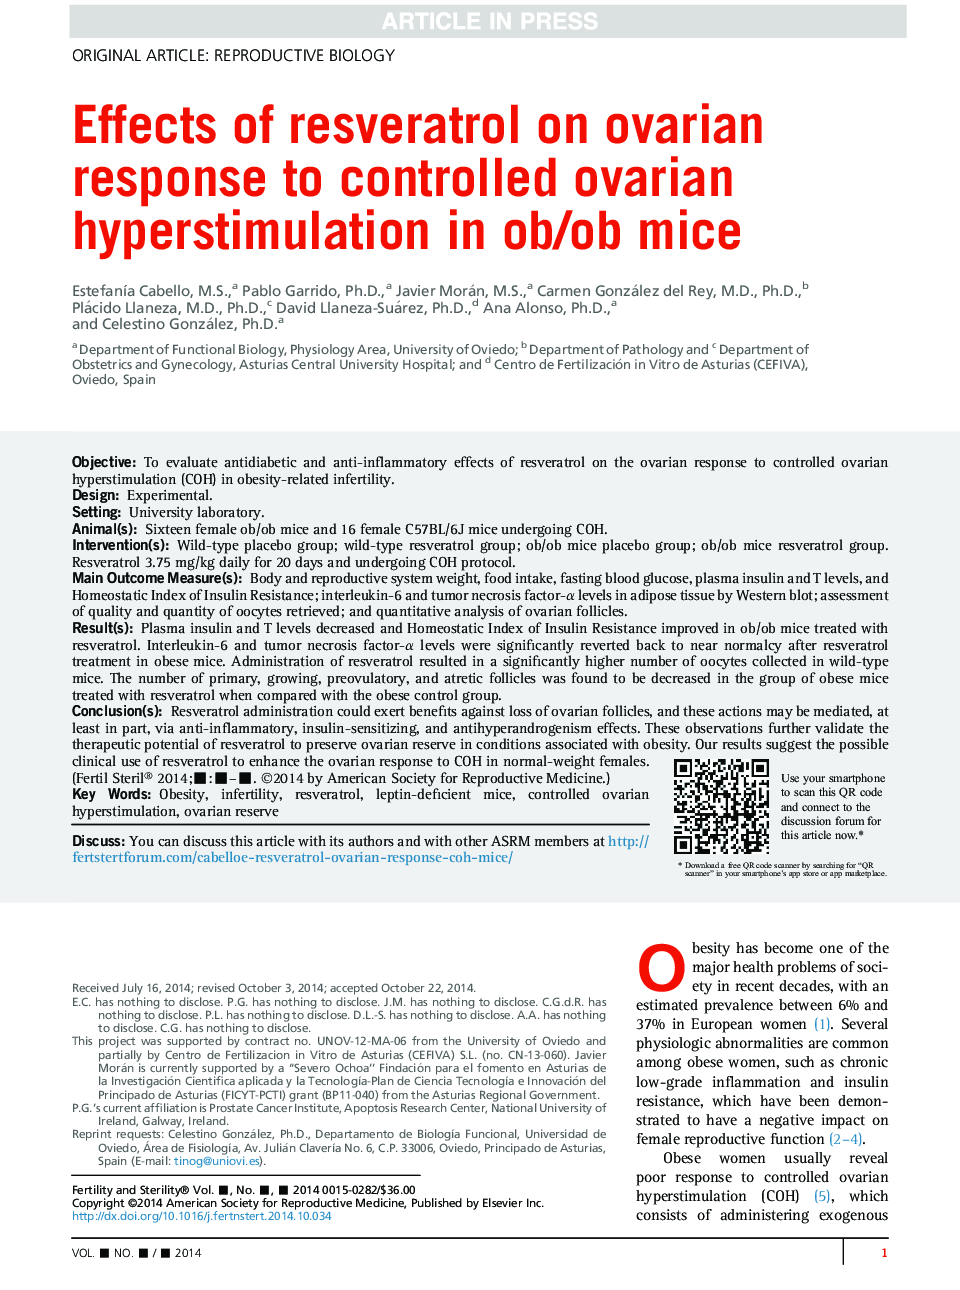 Effects of resveratrol on ovarian response to controlled ovarian hyperstimulation in ob/ob mice